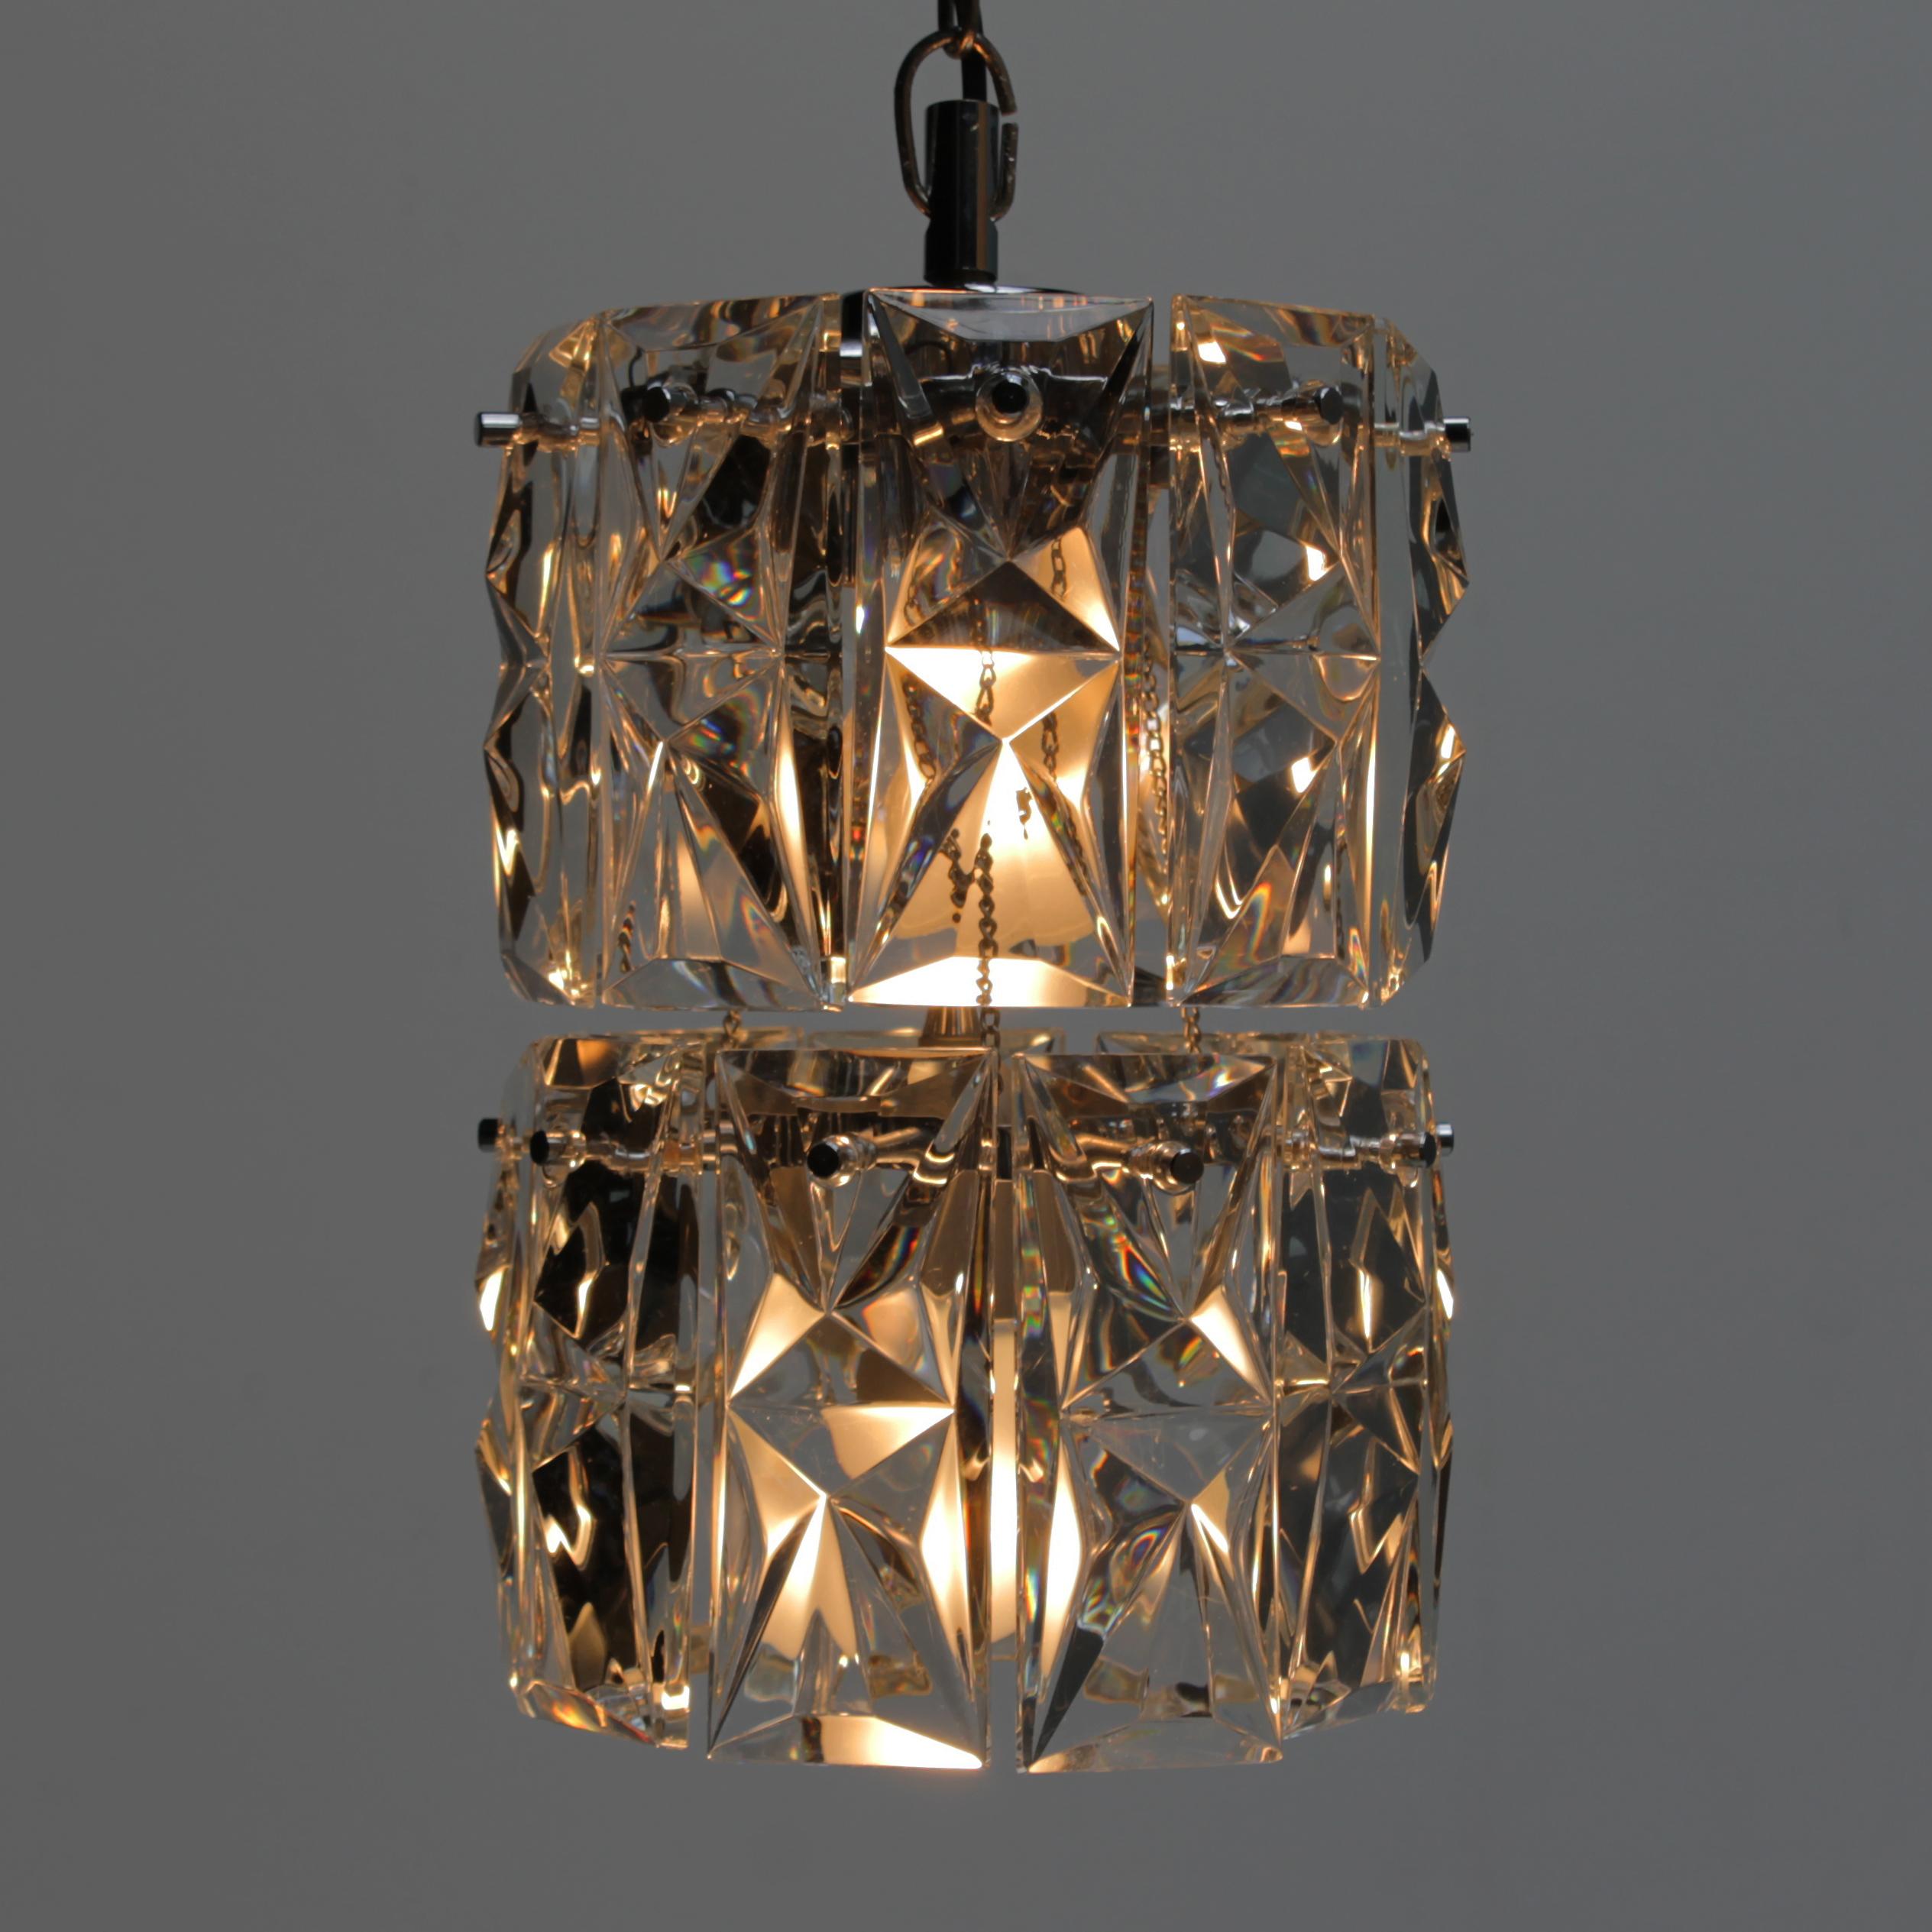 German Kinkeldey 2-tier pendant with 18 faceted crystals and two light sources.

Kinkeldey is German manufacturer of high end lighting fixtures. The company attracted international attention when they won the prestigious IF Design Award in 1969